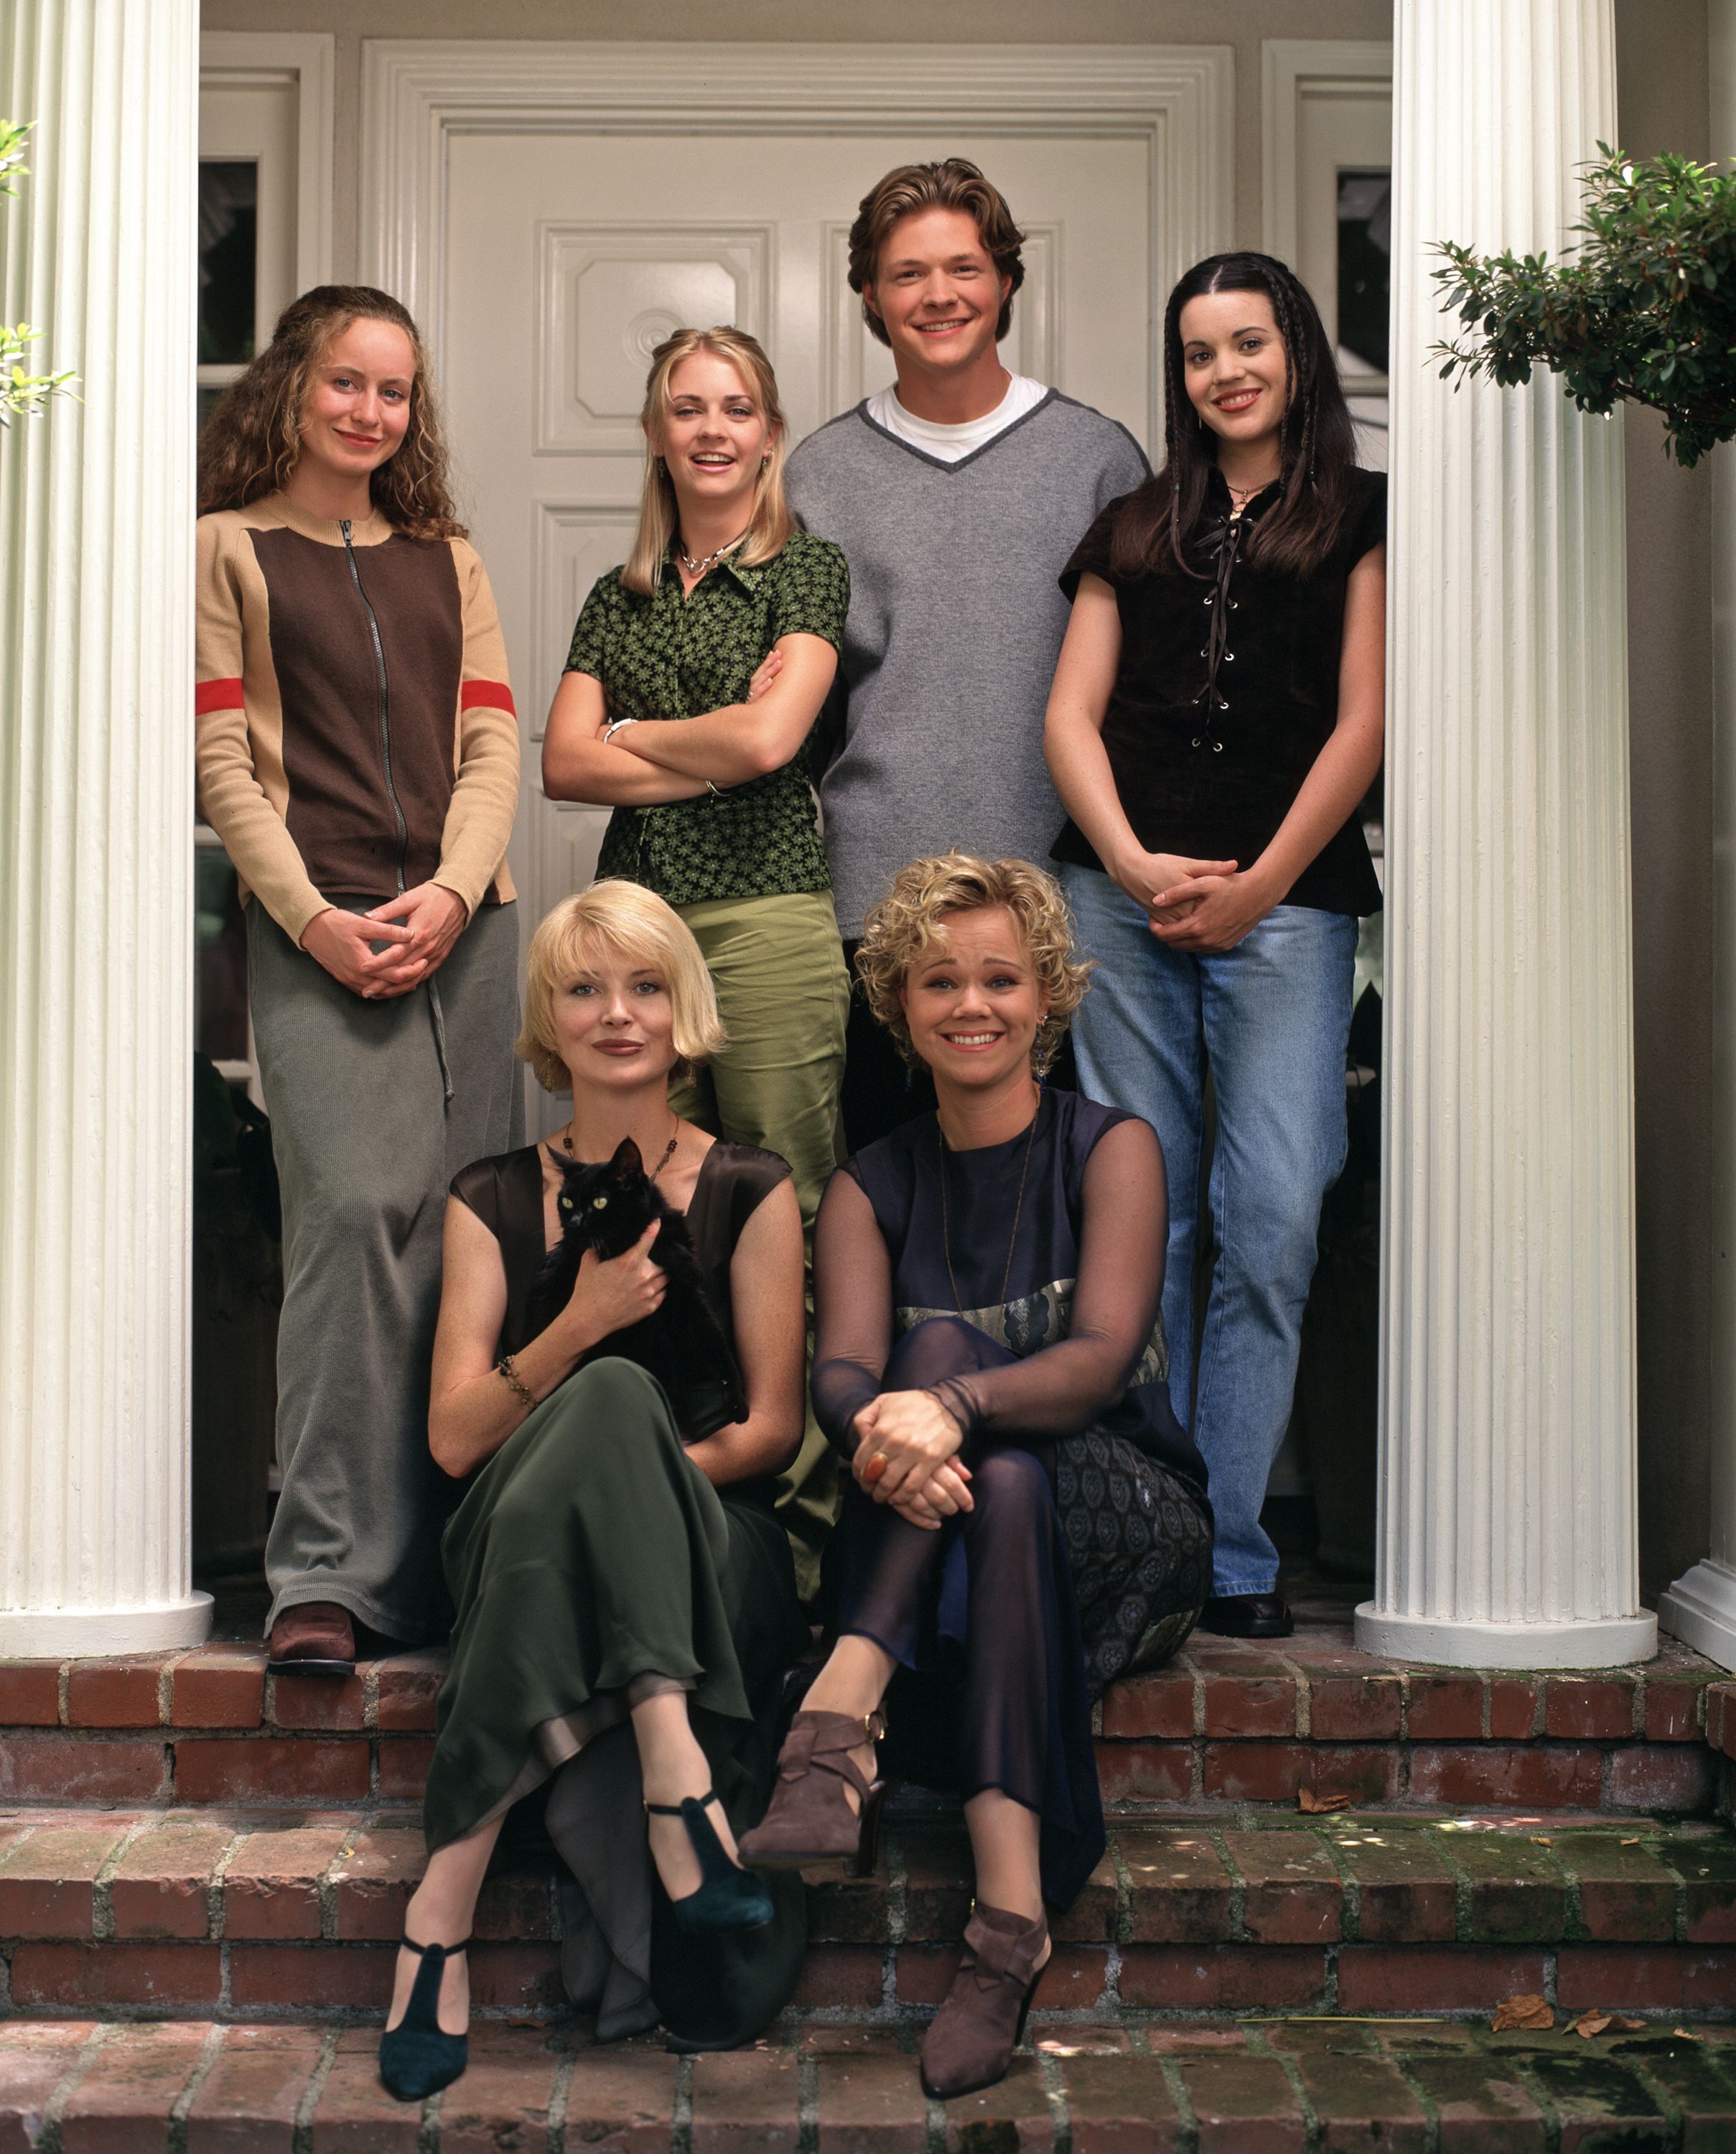 The Original Sabrina The Teenage Witch Cast Looks Exactly The Same In